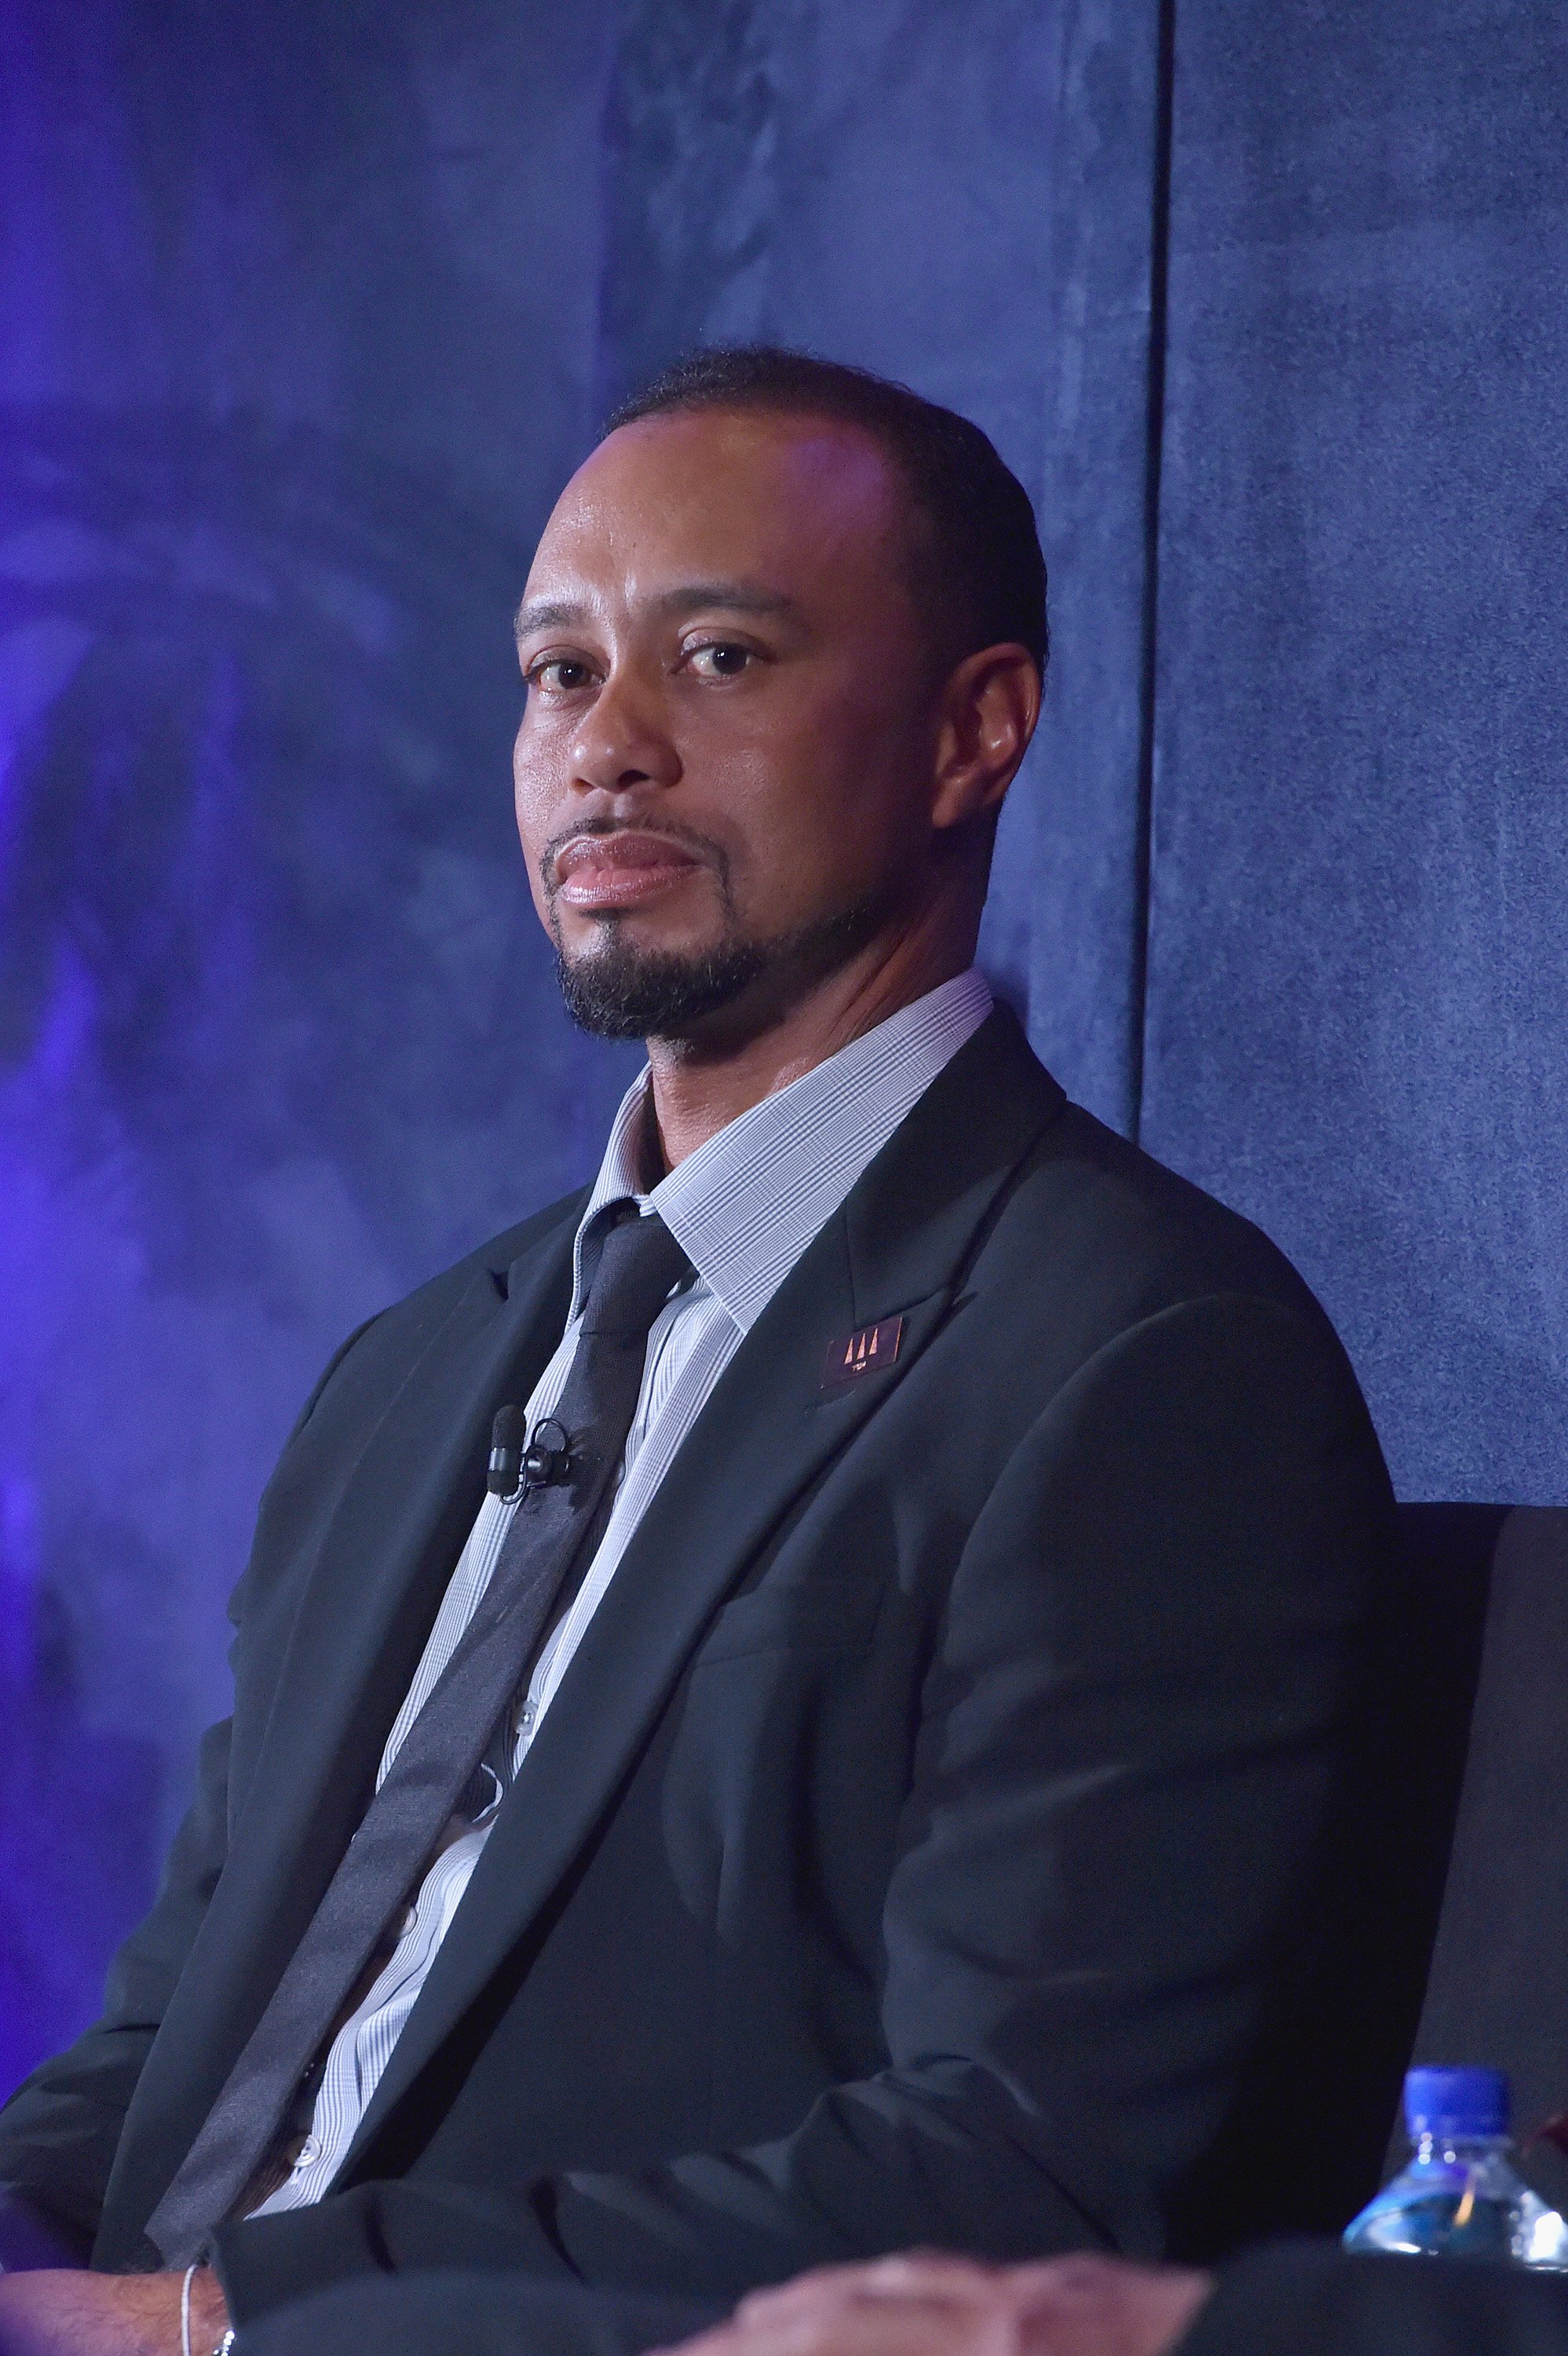 Tiger Woods speaks onstage during the Tiger Woods Foundation's 20th Anniversary Celebration. | Photo: GettyImages